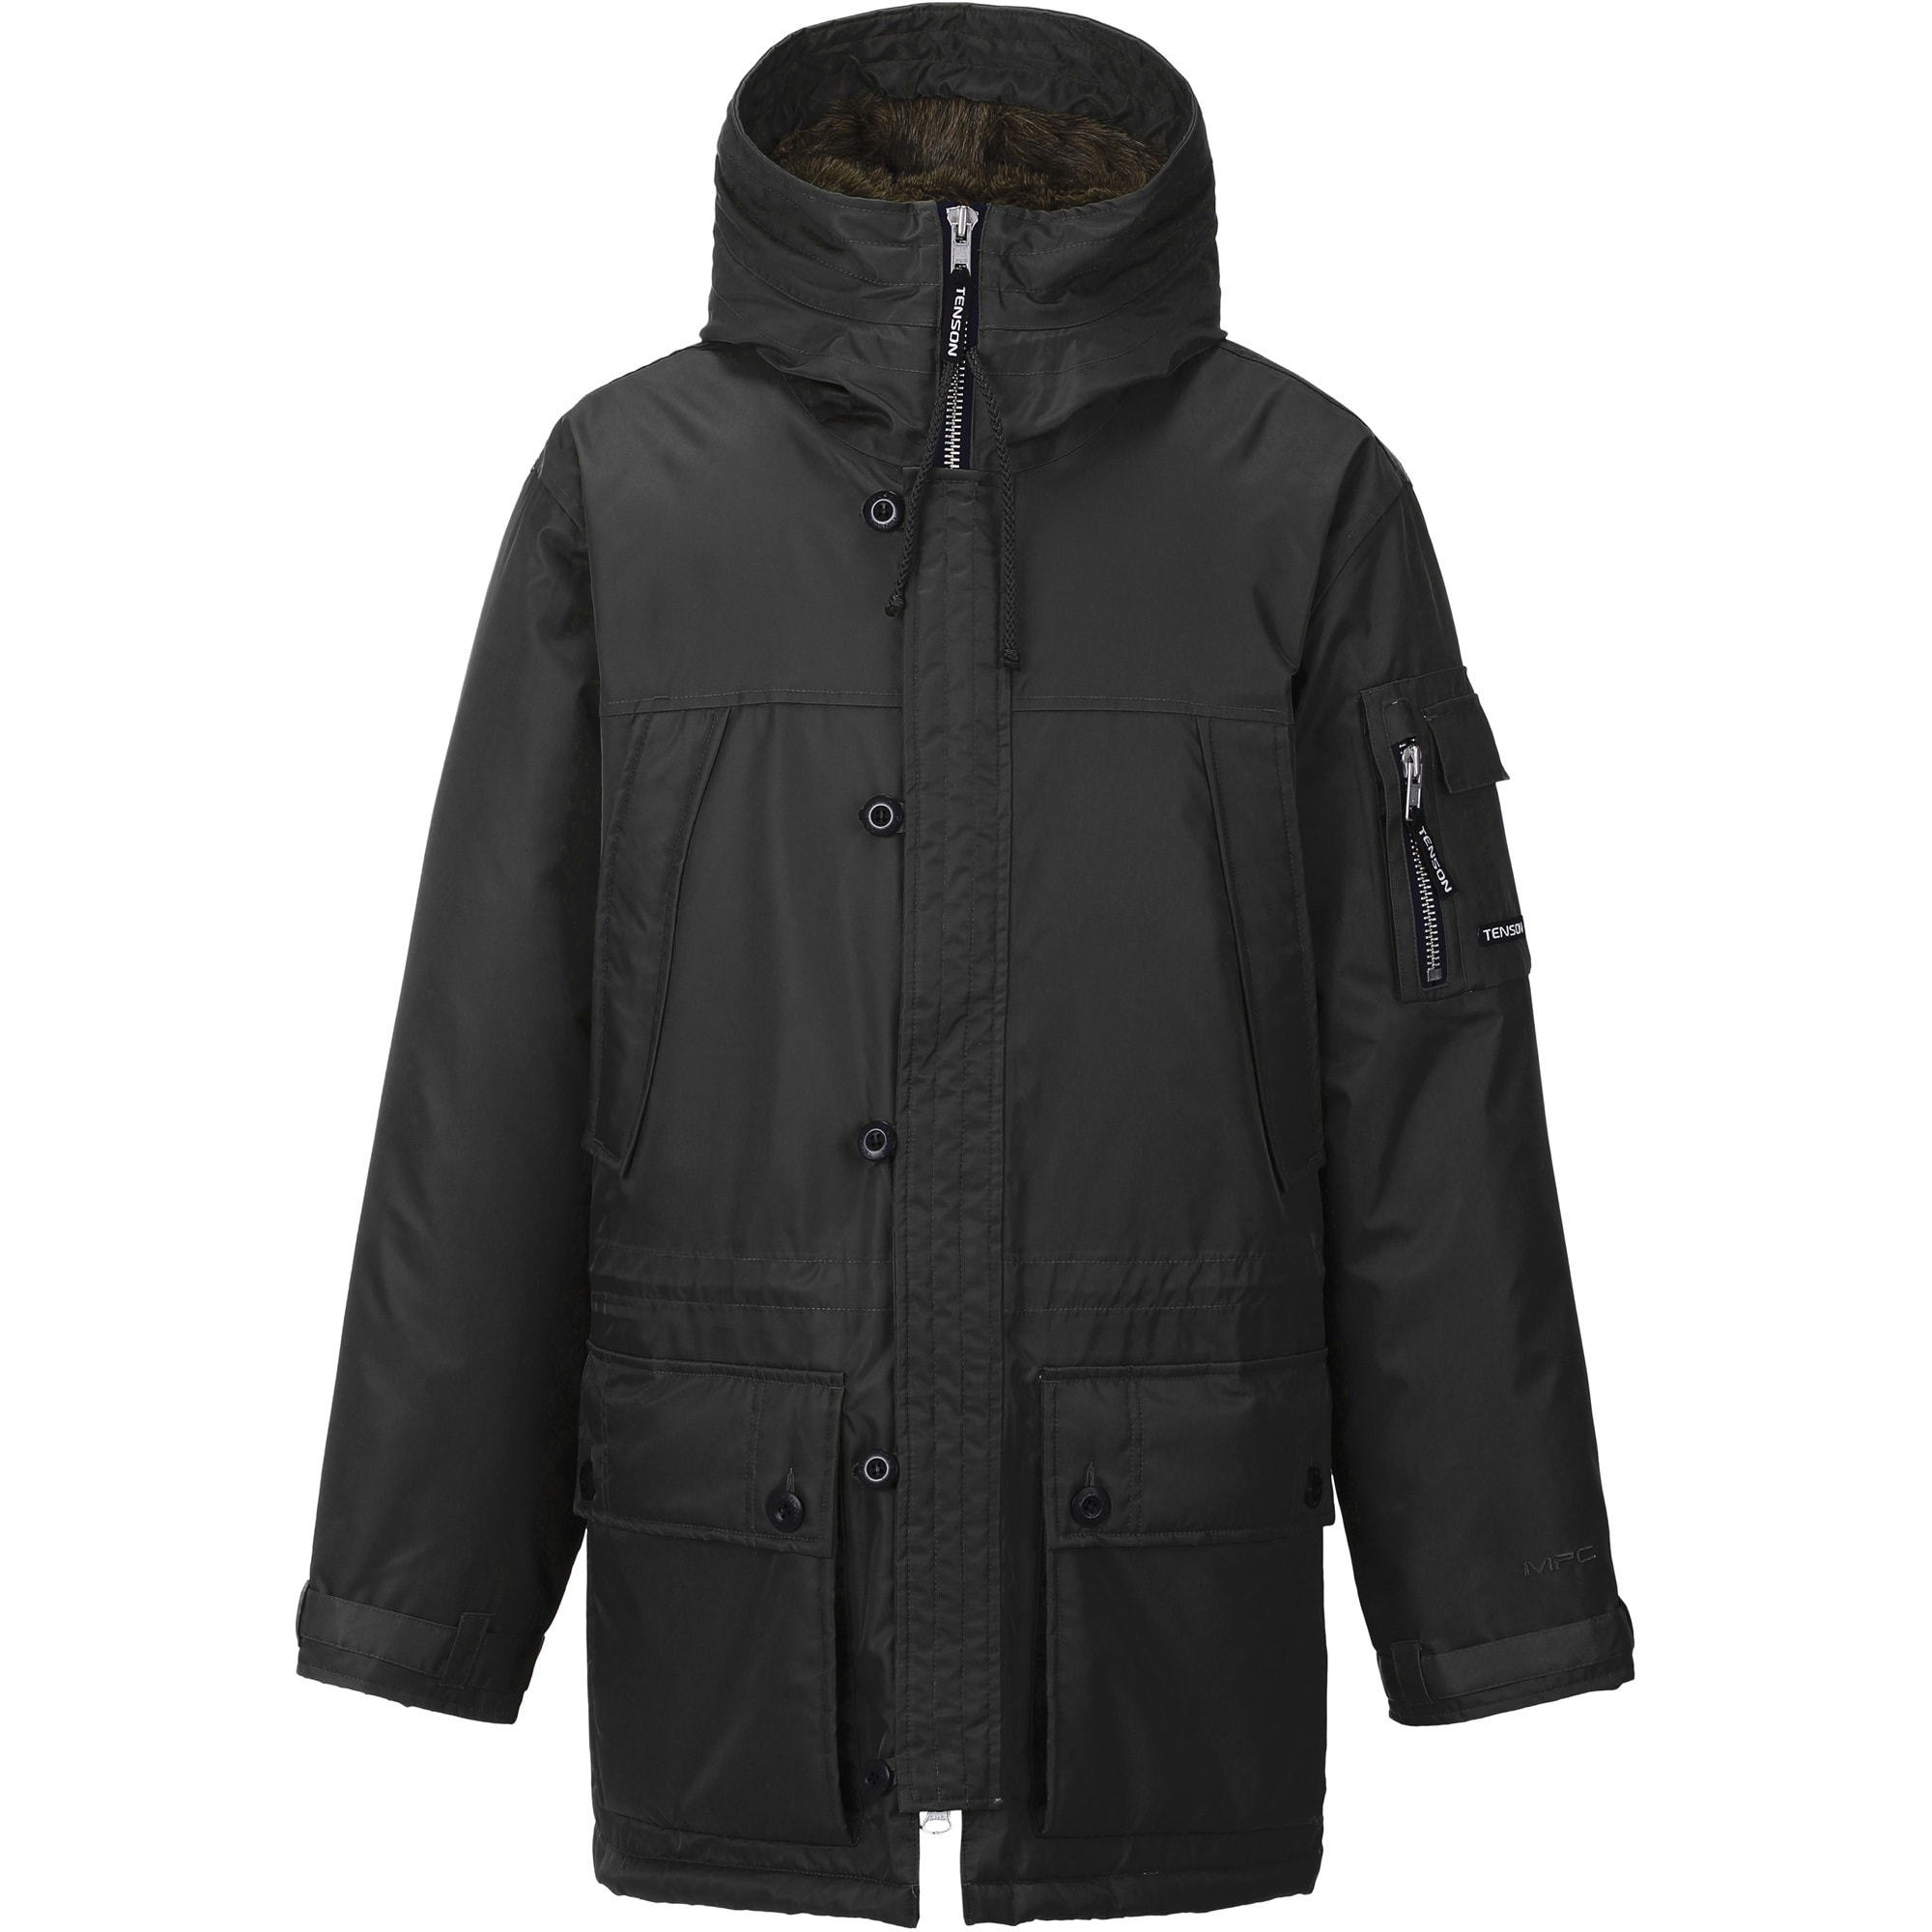 Buy Tenson Himalaya Limited Men's Parka from Outnorth